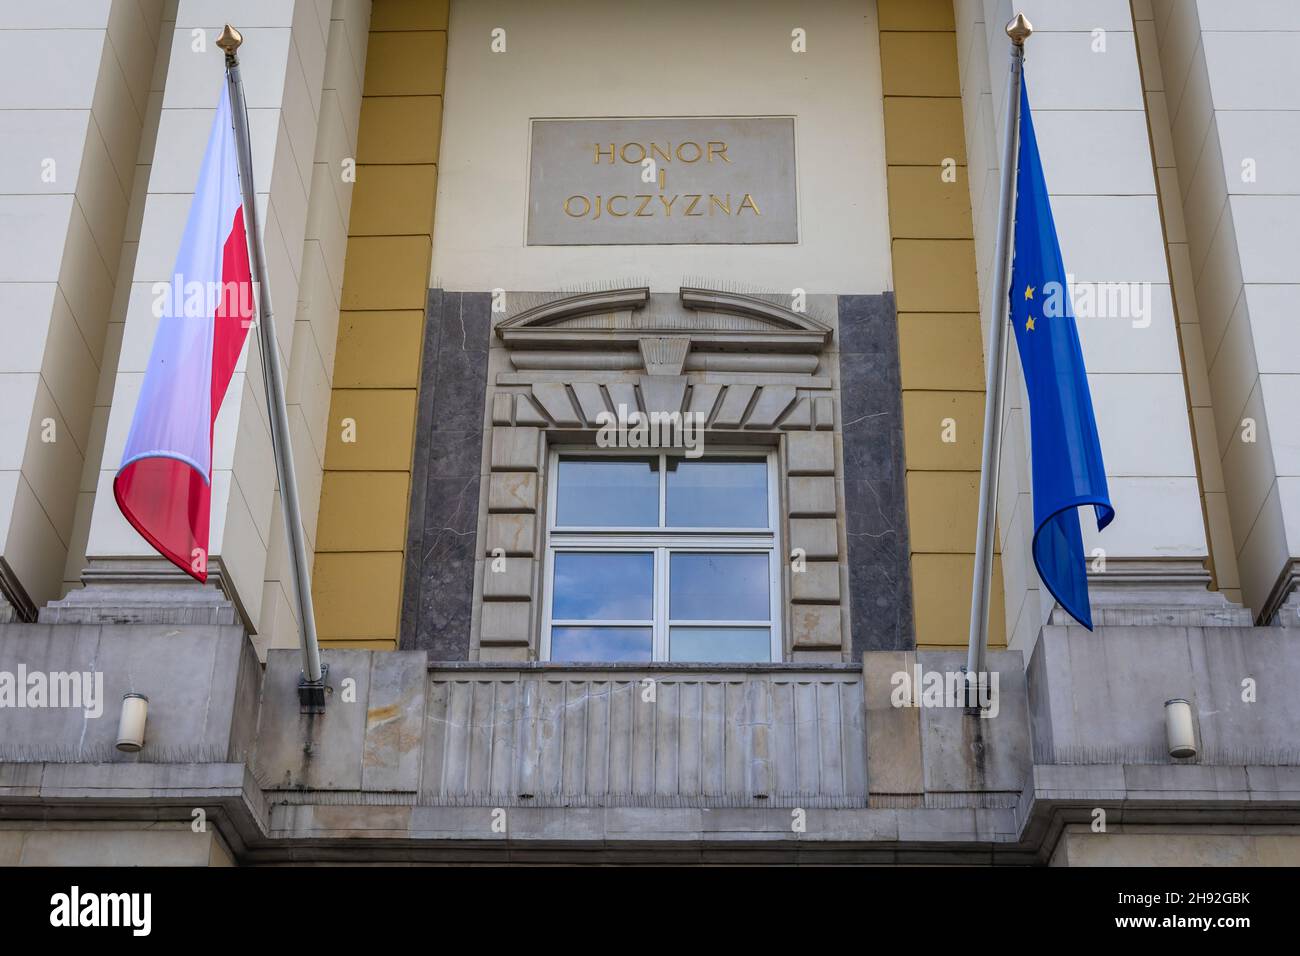 Honour and Fatherland sign on main building of Chancellery of the Prime Minister of Poland in Ujazdow Avenue in Warsaw, capital of Poland Stock Photo